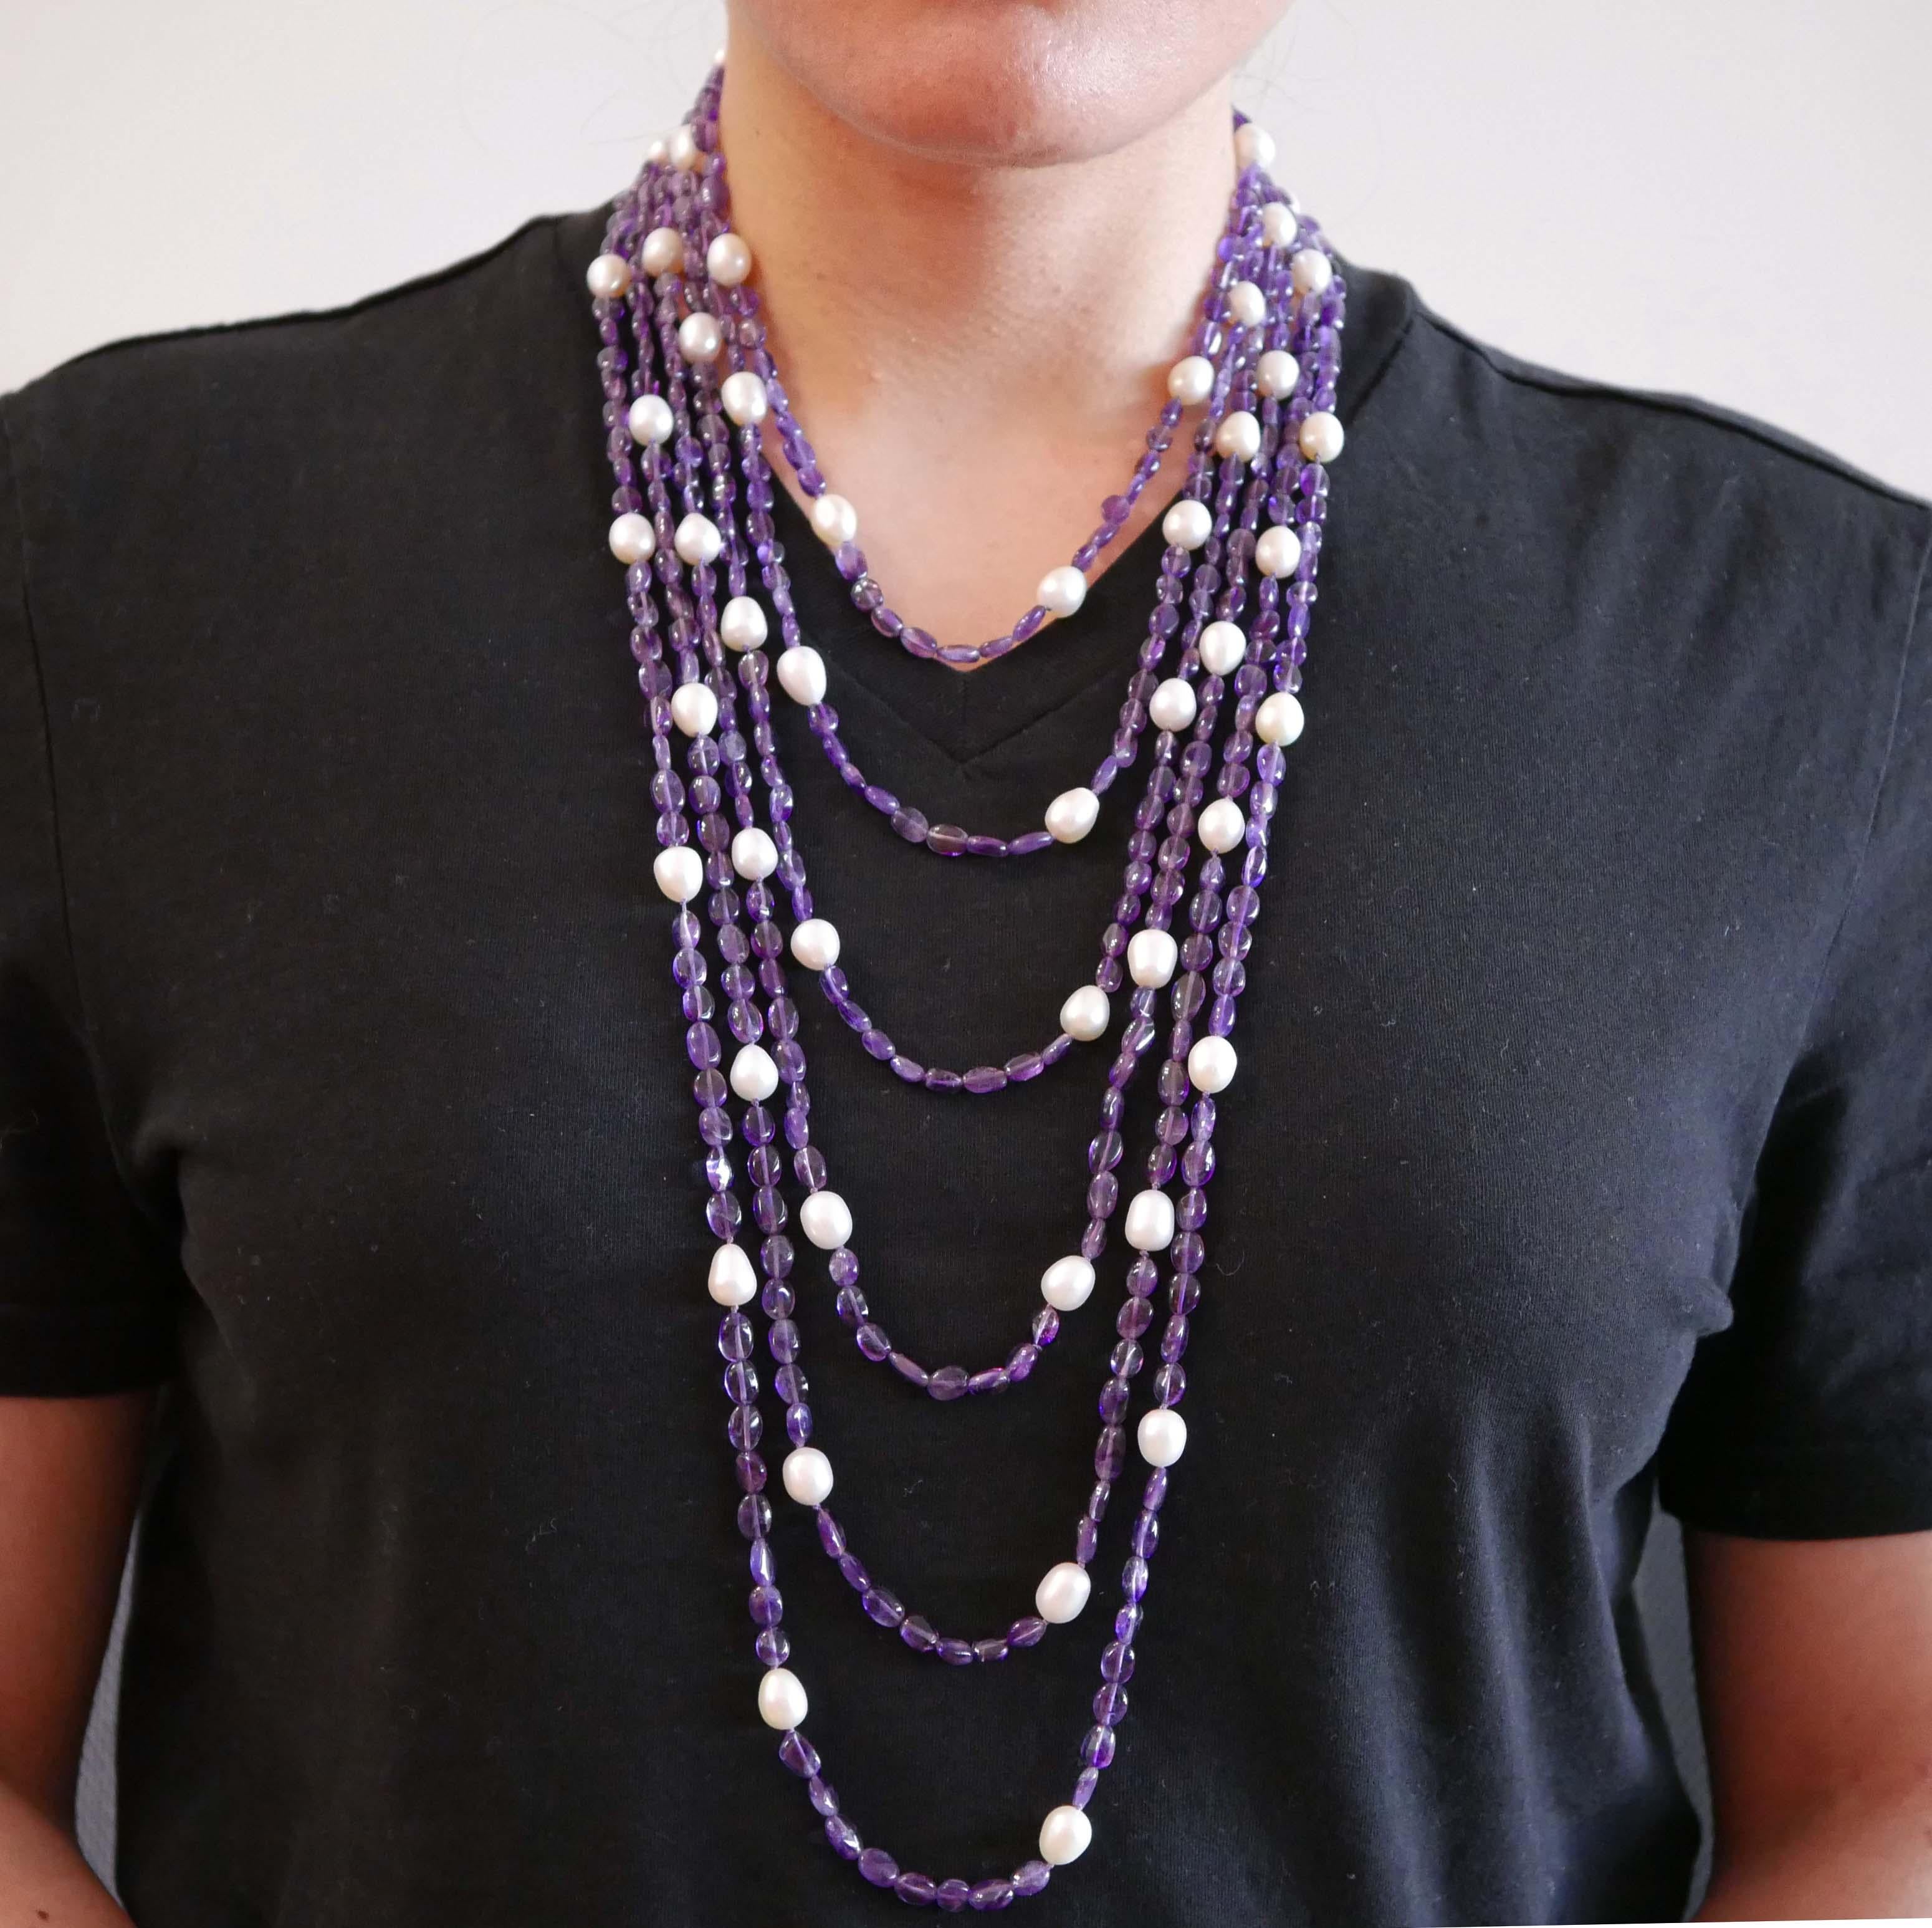 Mixed Cut Amethysts, Pearls, Multi-Strands Necklace. For Sale